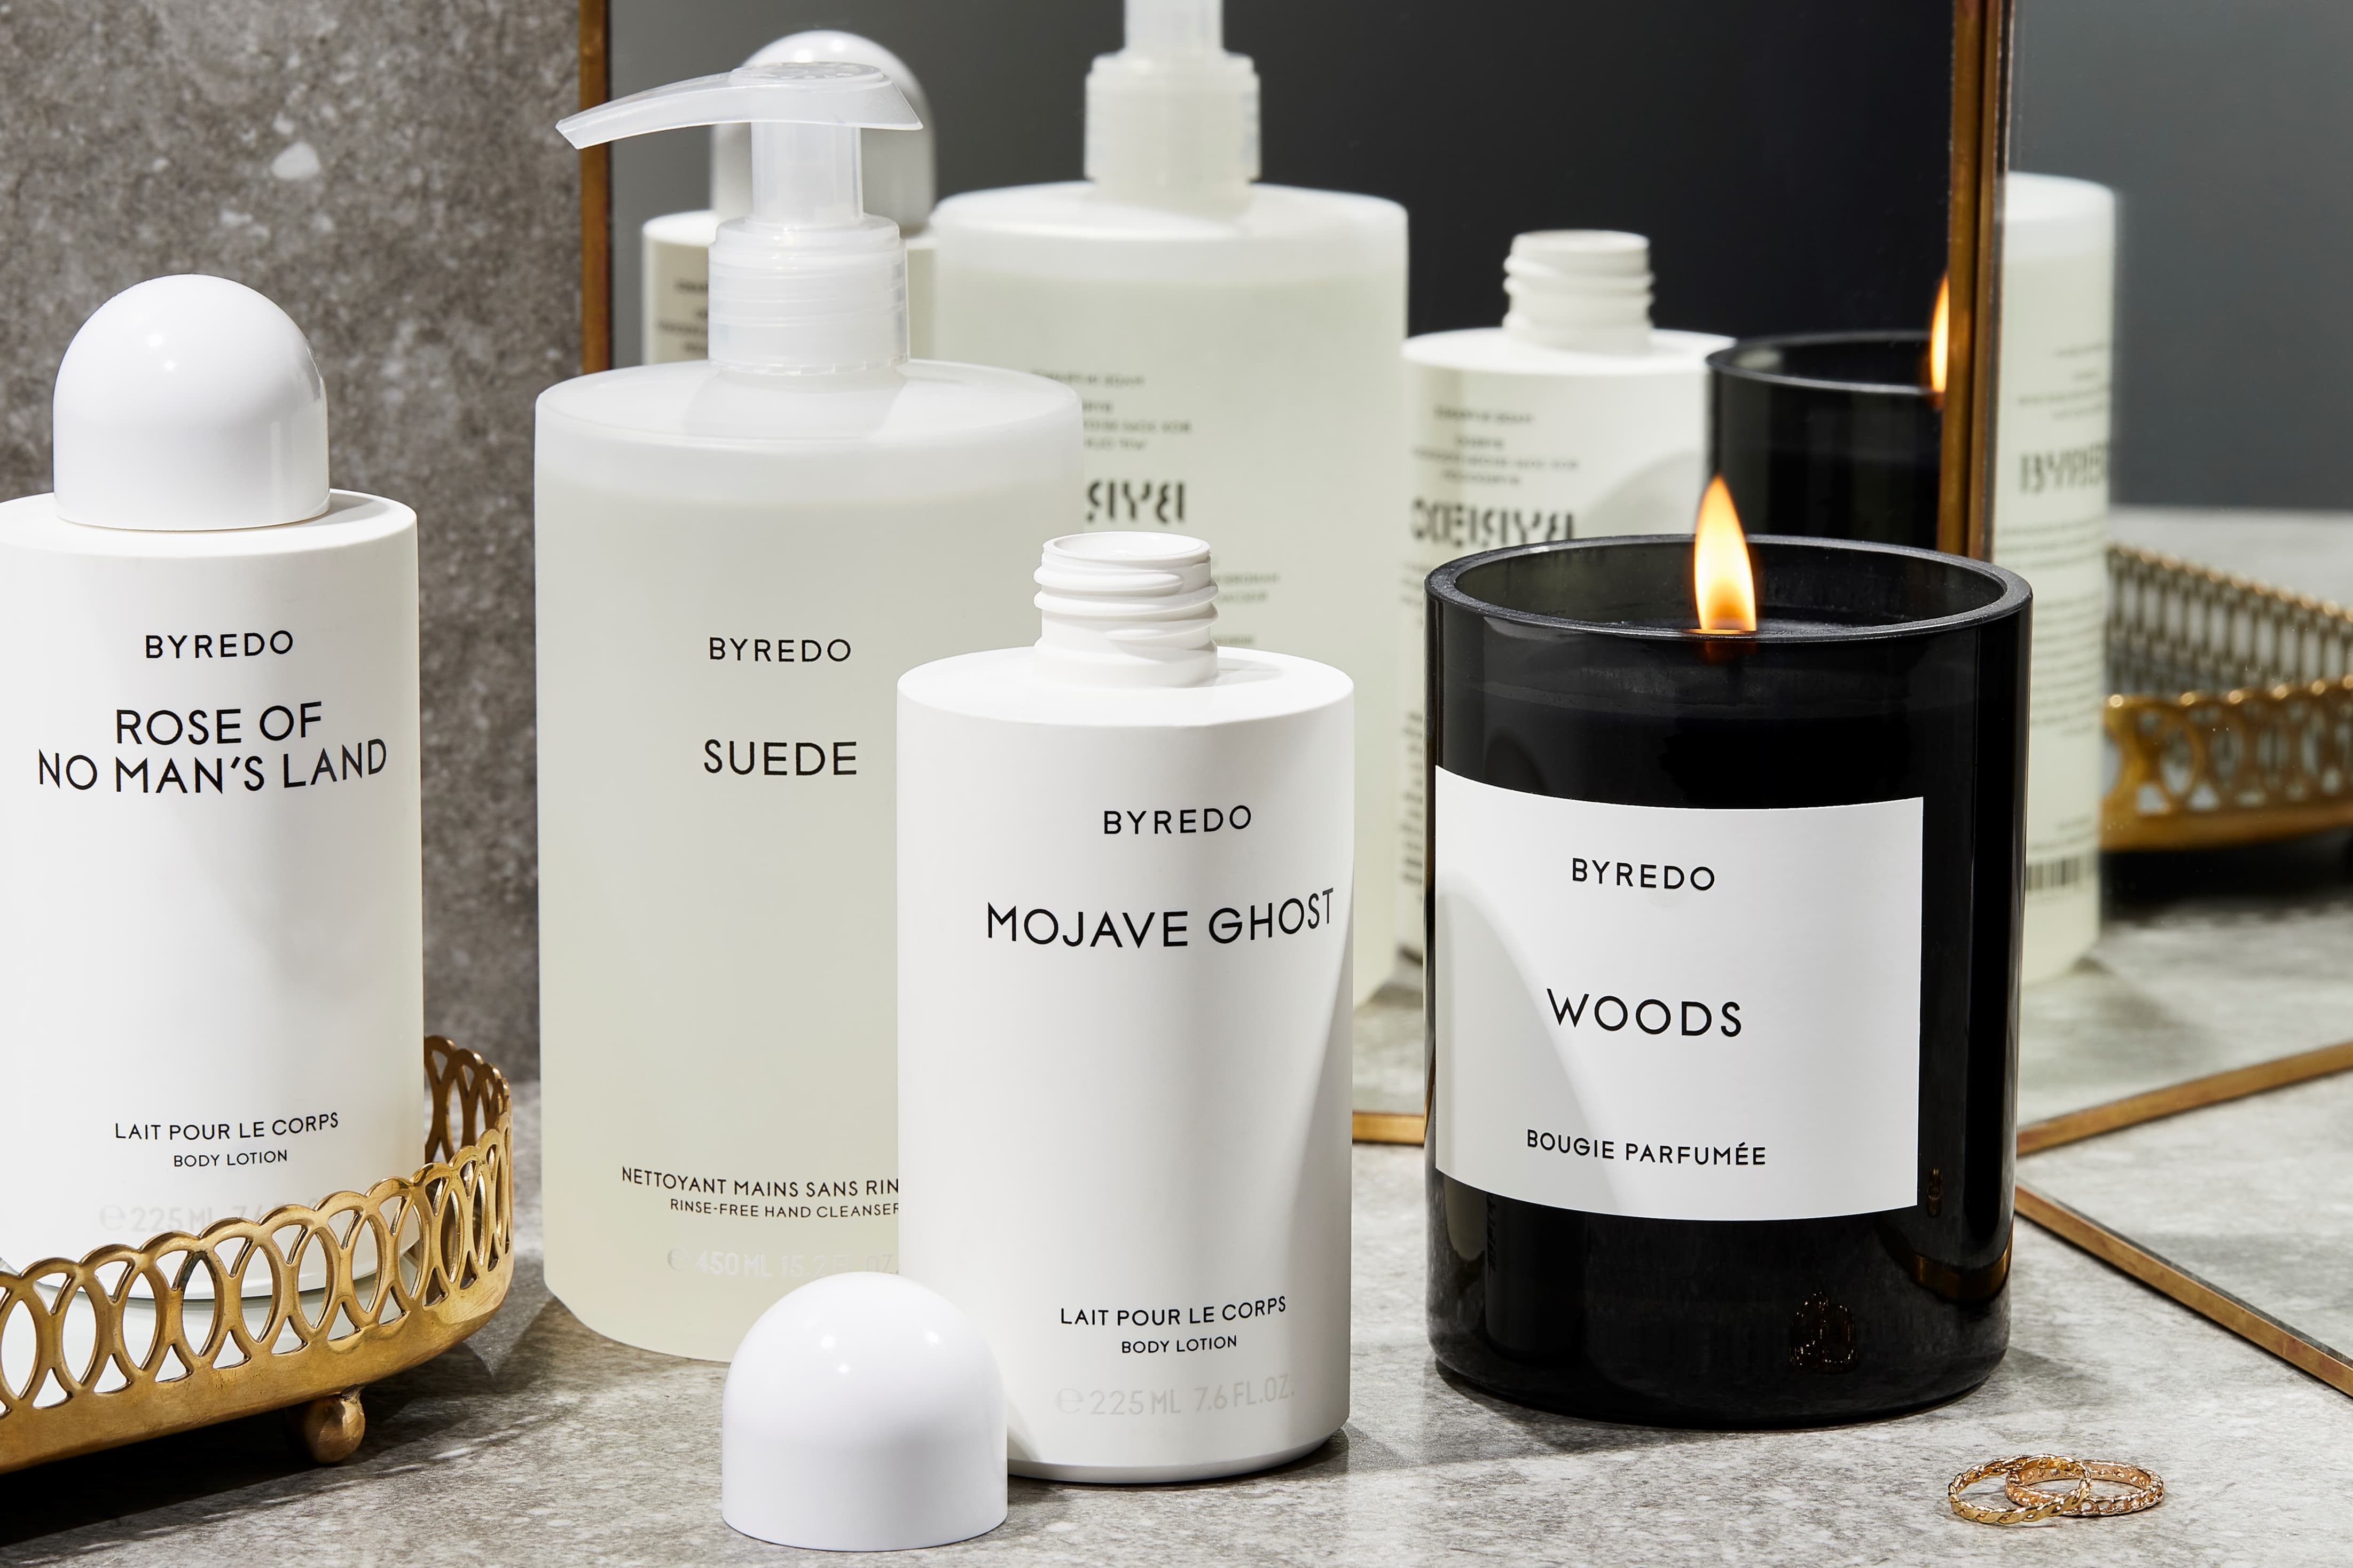 6 Of The Best Byredo Products